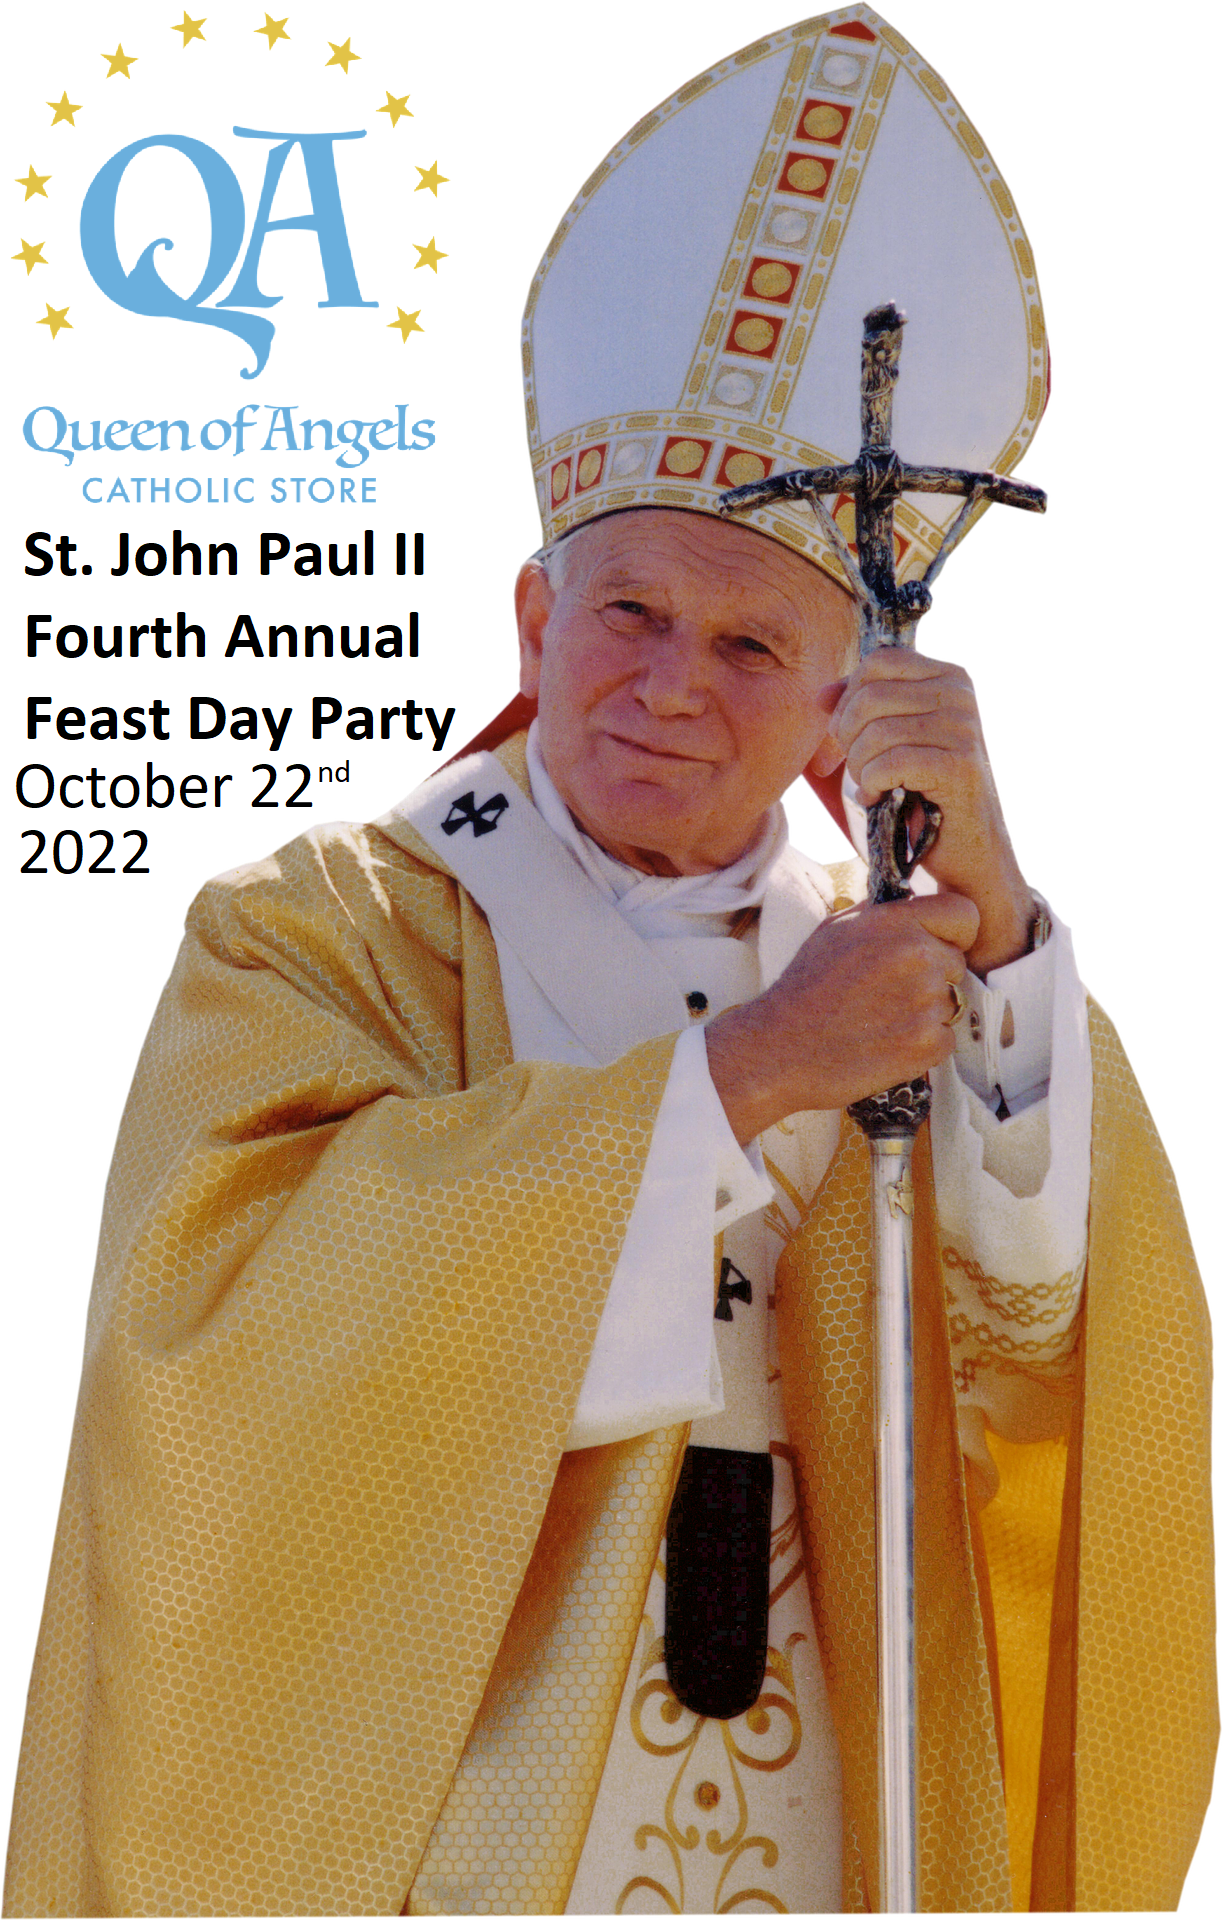 St. John Paul II Fourth Annual Feast Day Party